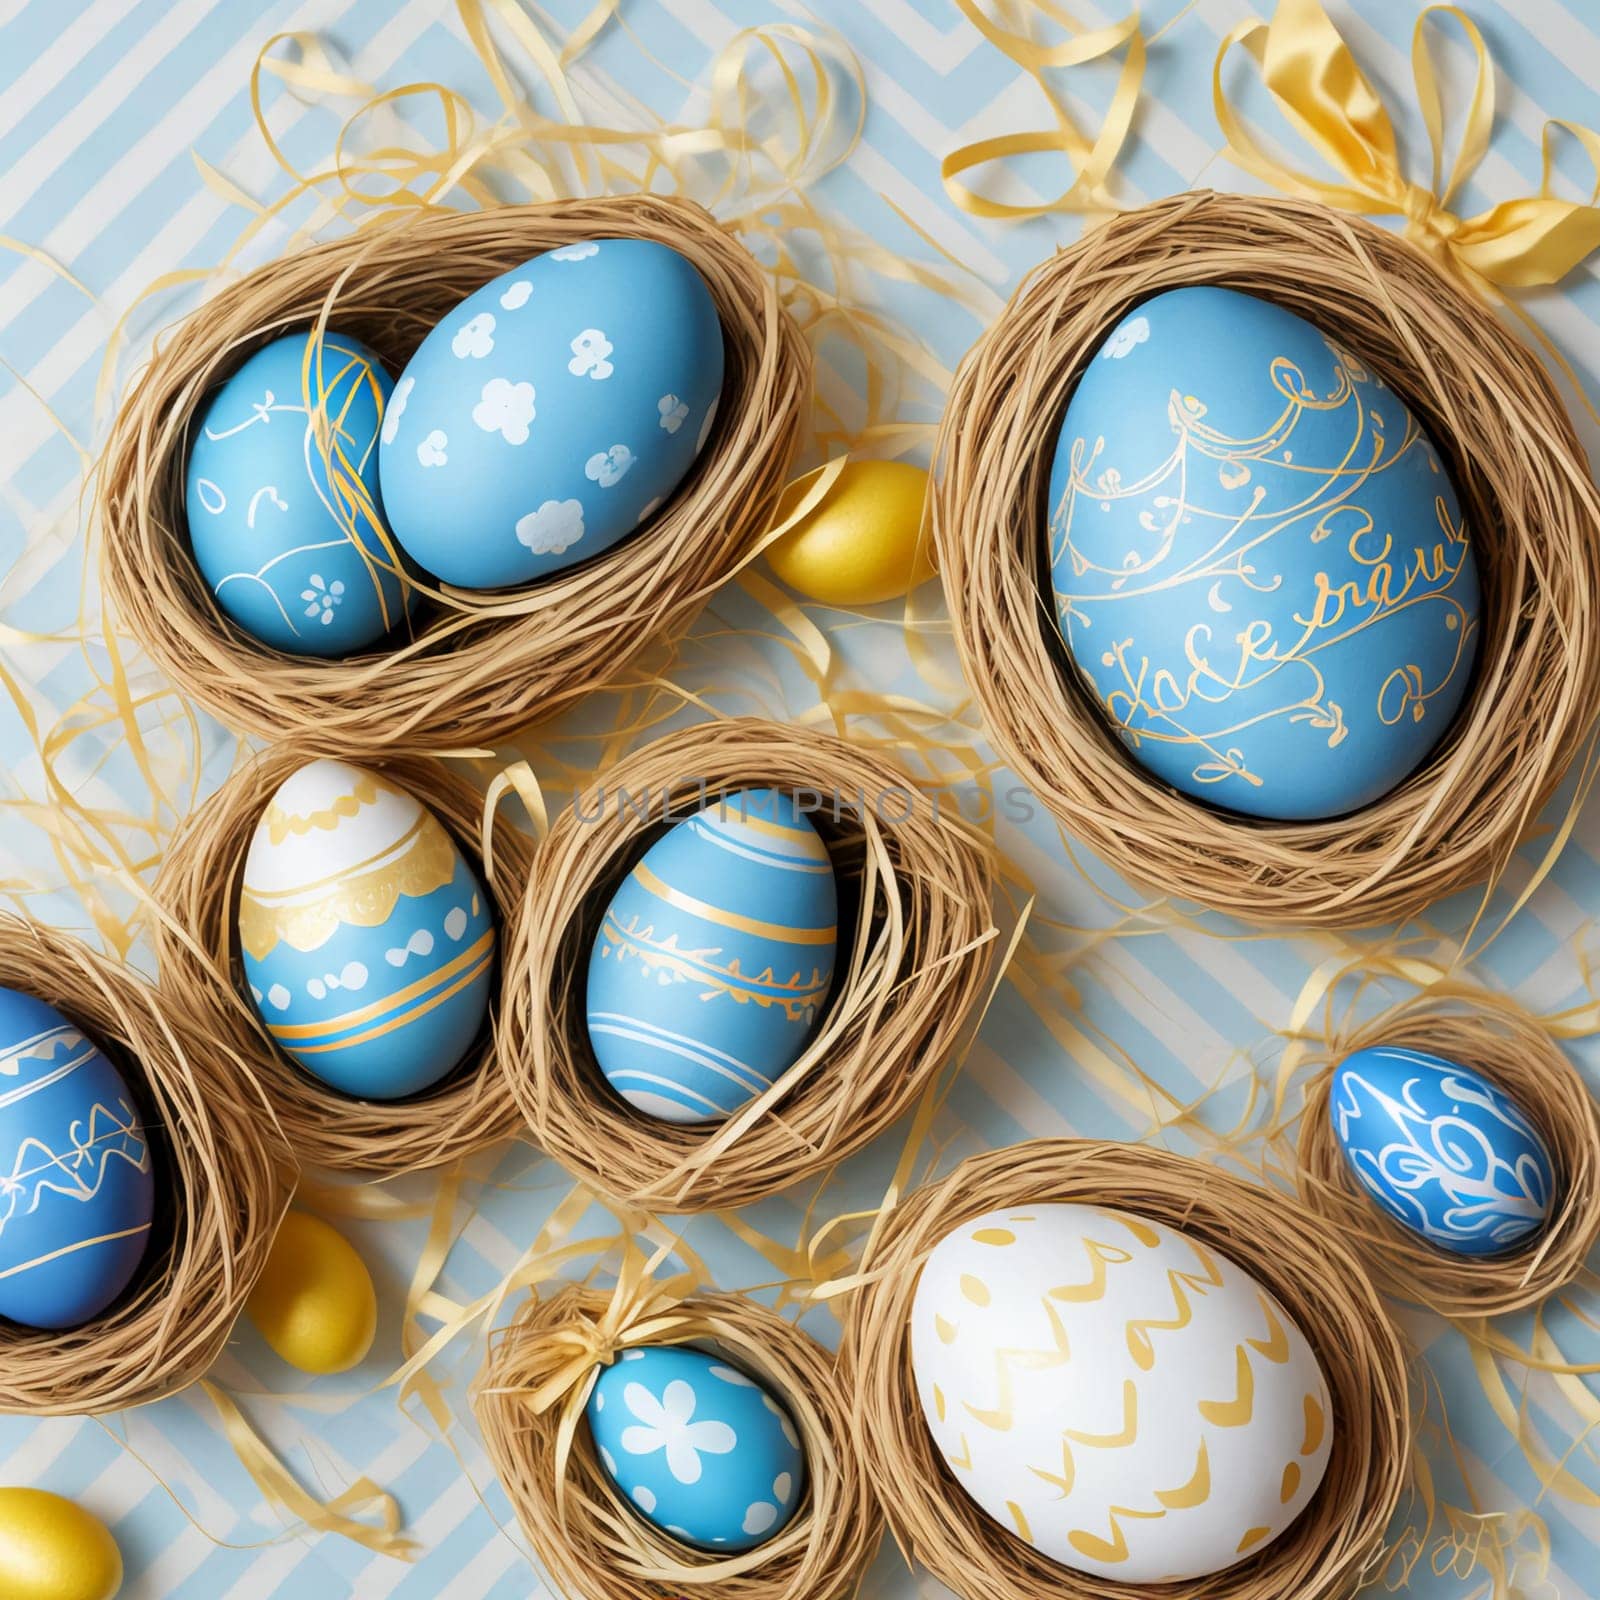 easter eggs in fashionable classic blue and gold colors, decorated with a striped pattern on a blue background,Easter greeting card